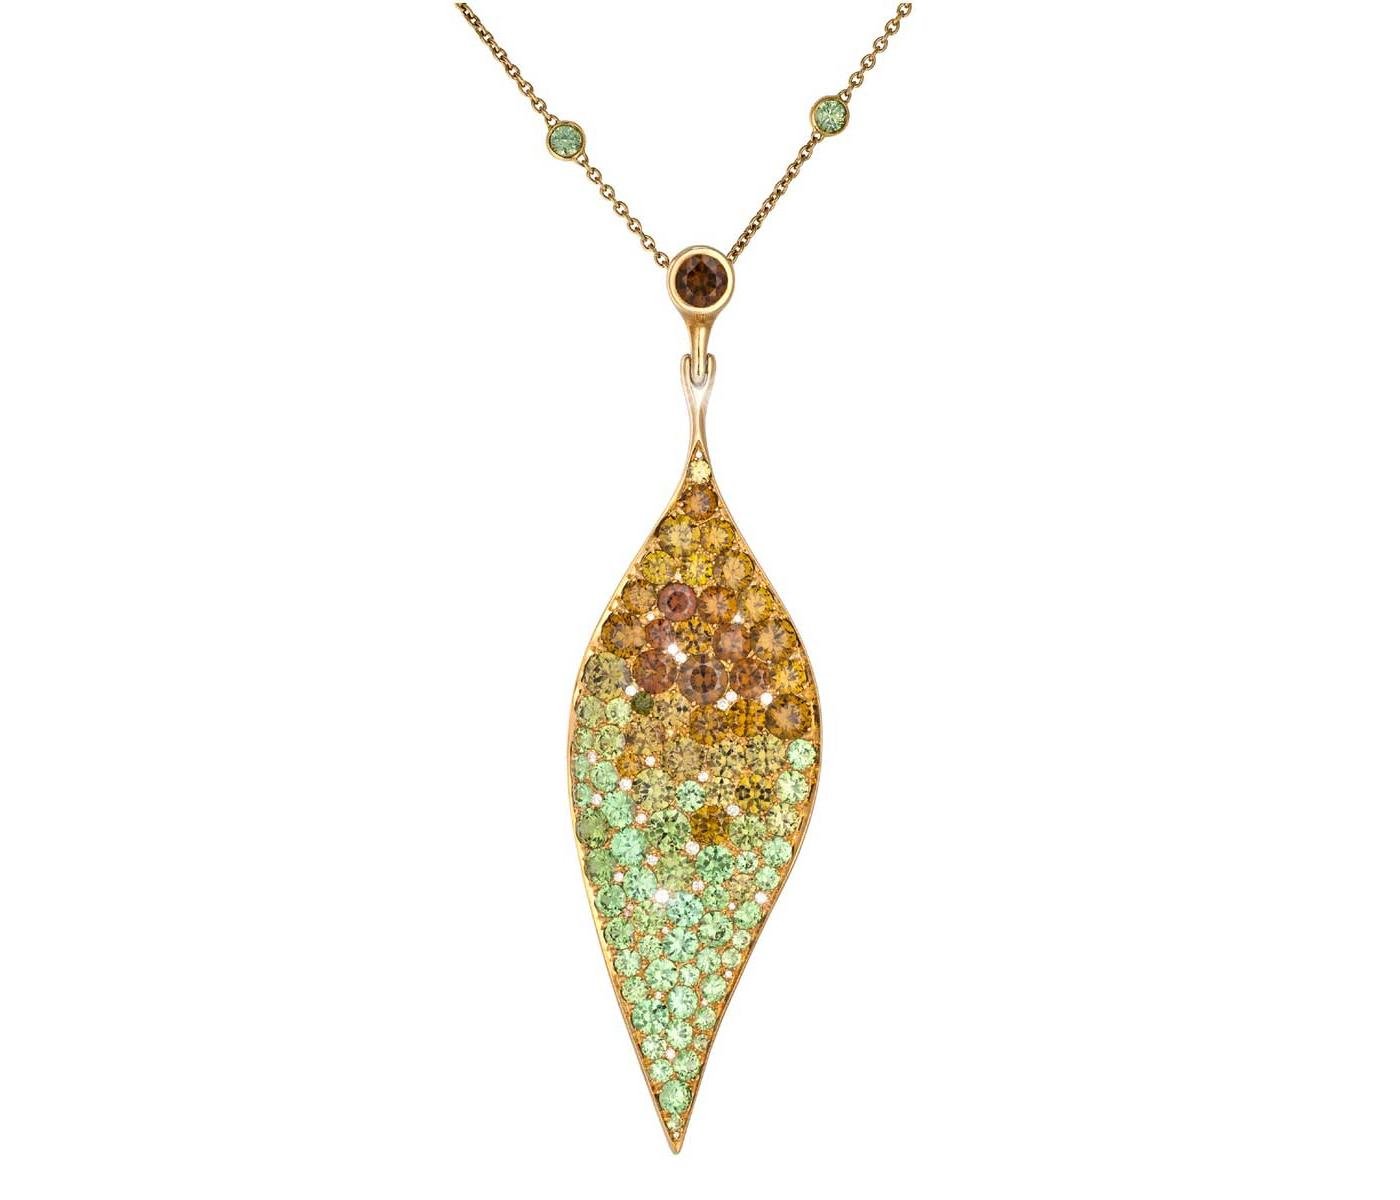 Pendant by Dietrich